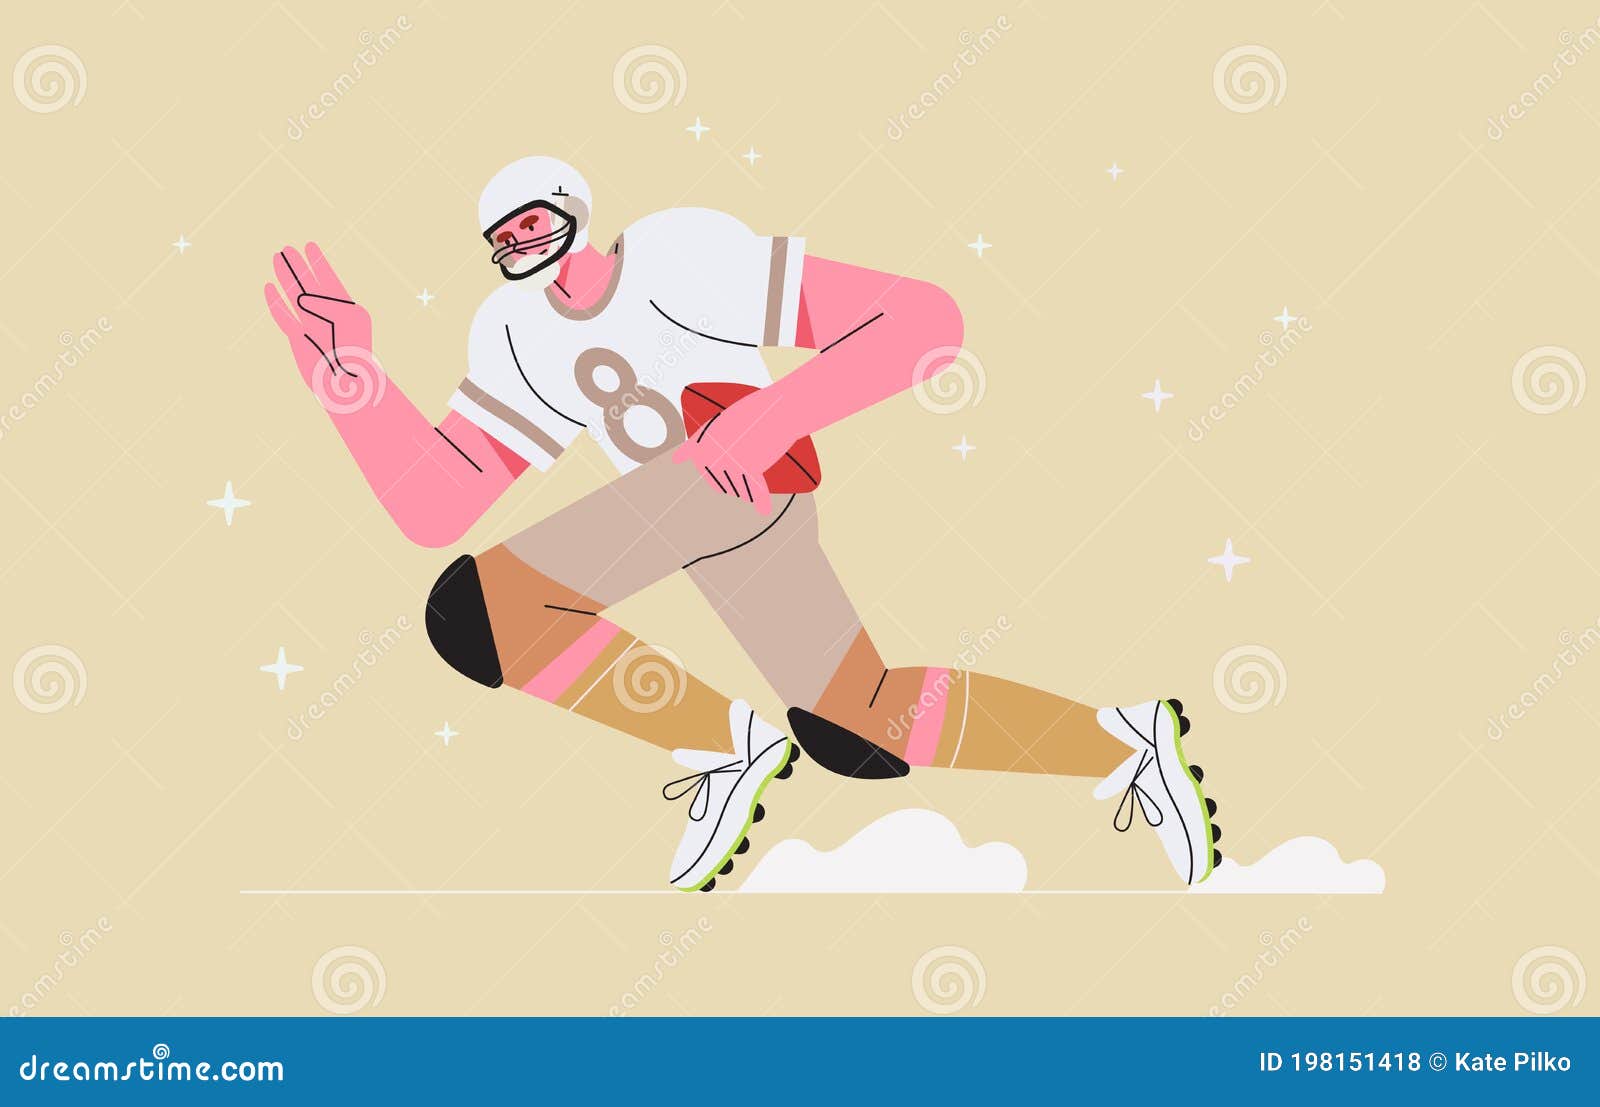 american football player running and holding ball. male trendy character playing football or gridiron and run fast